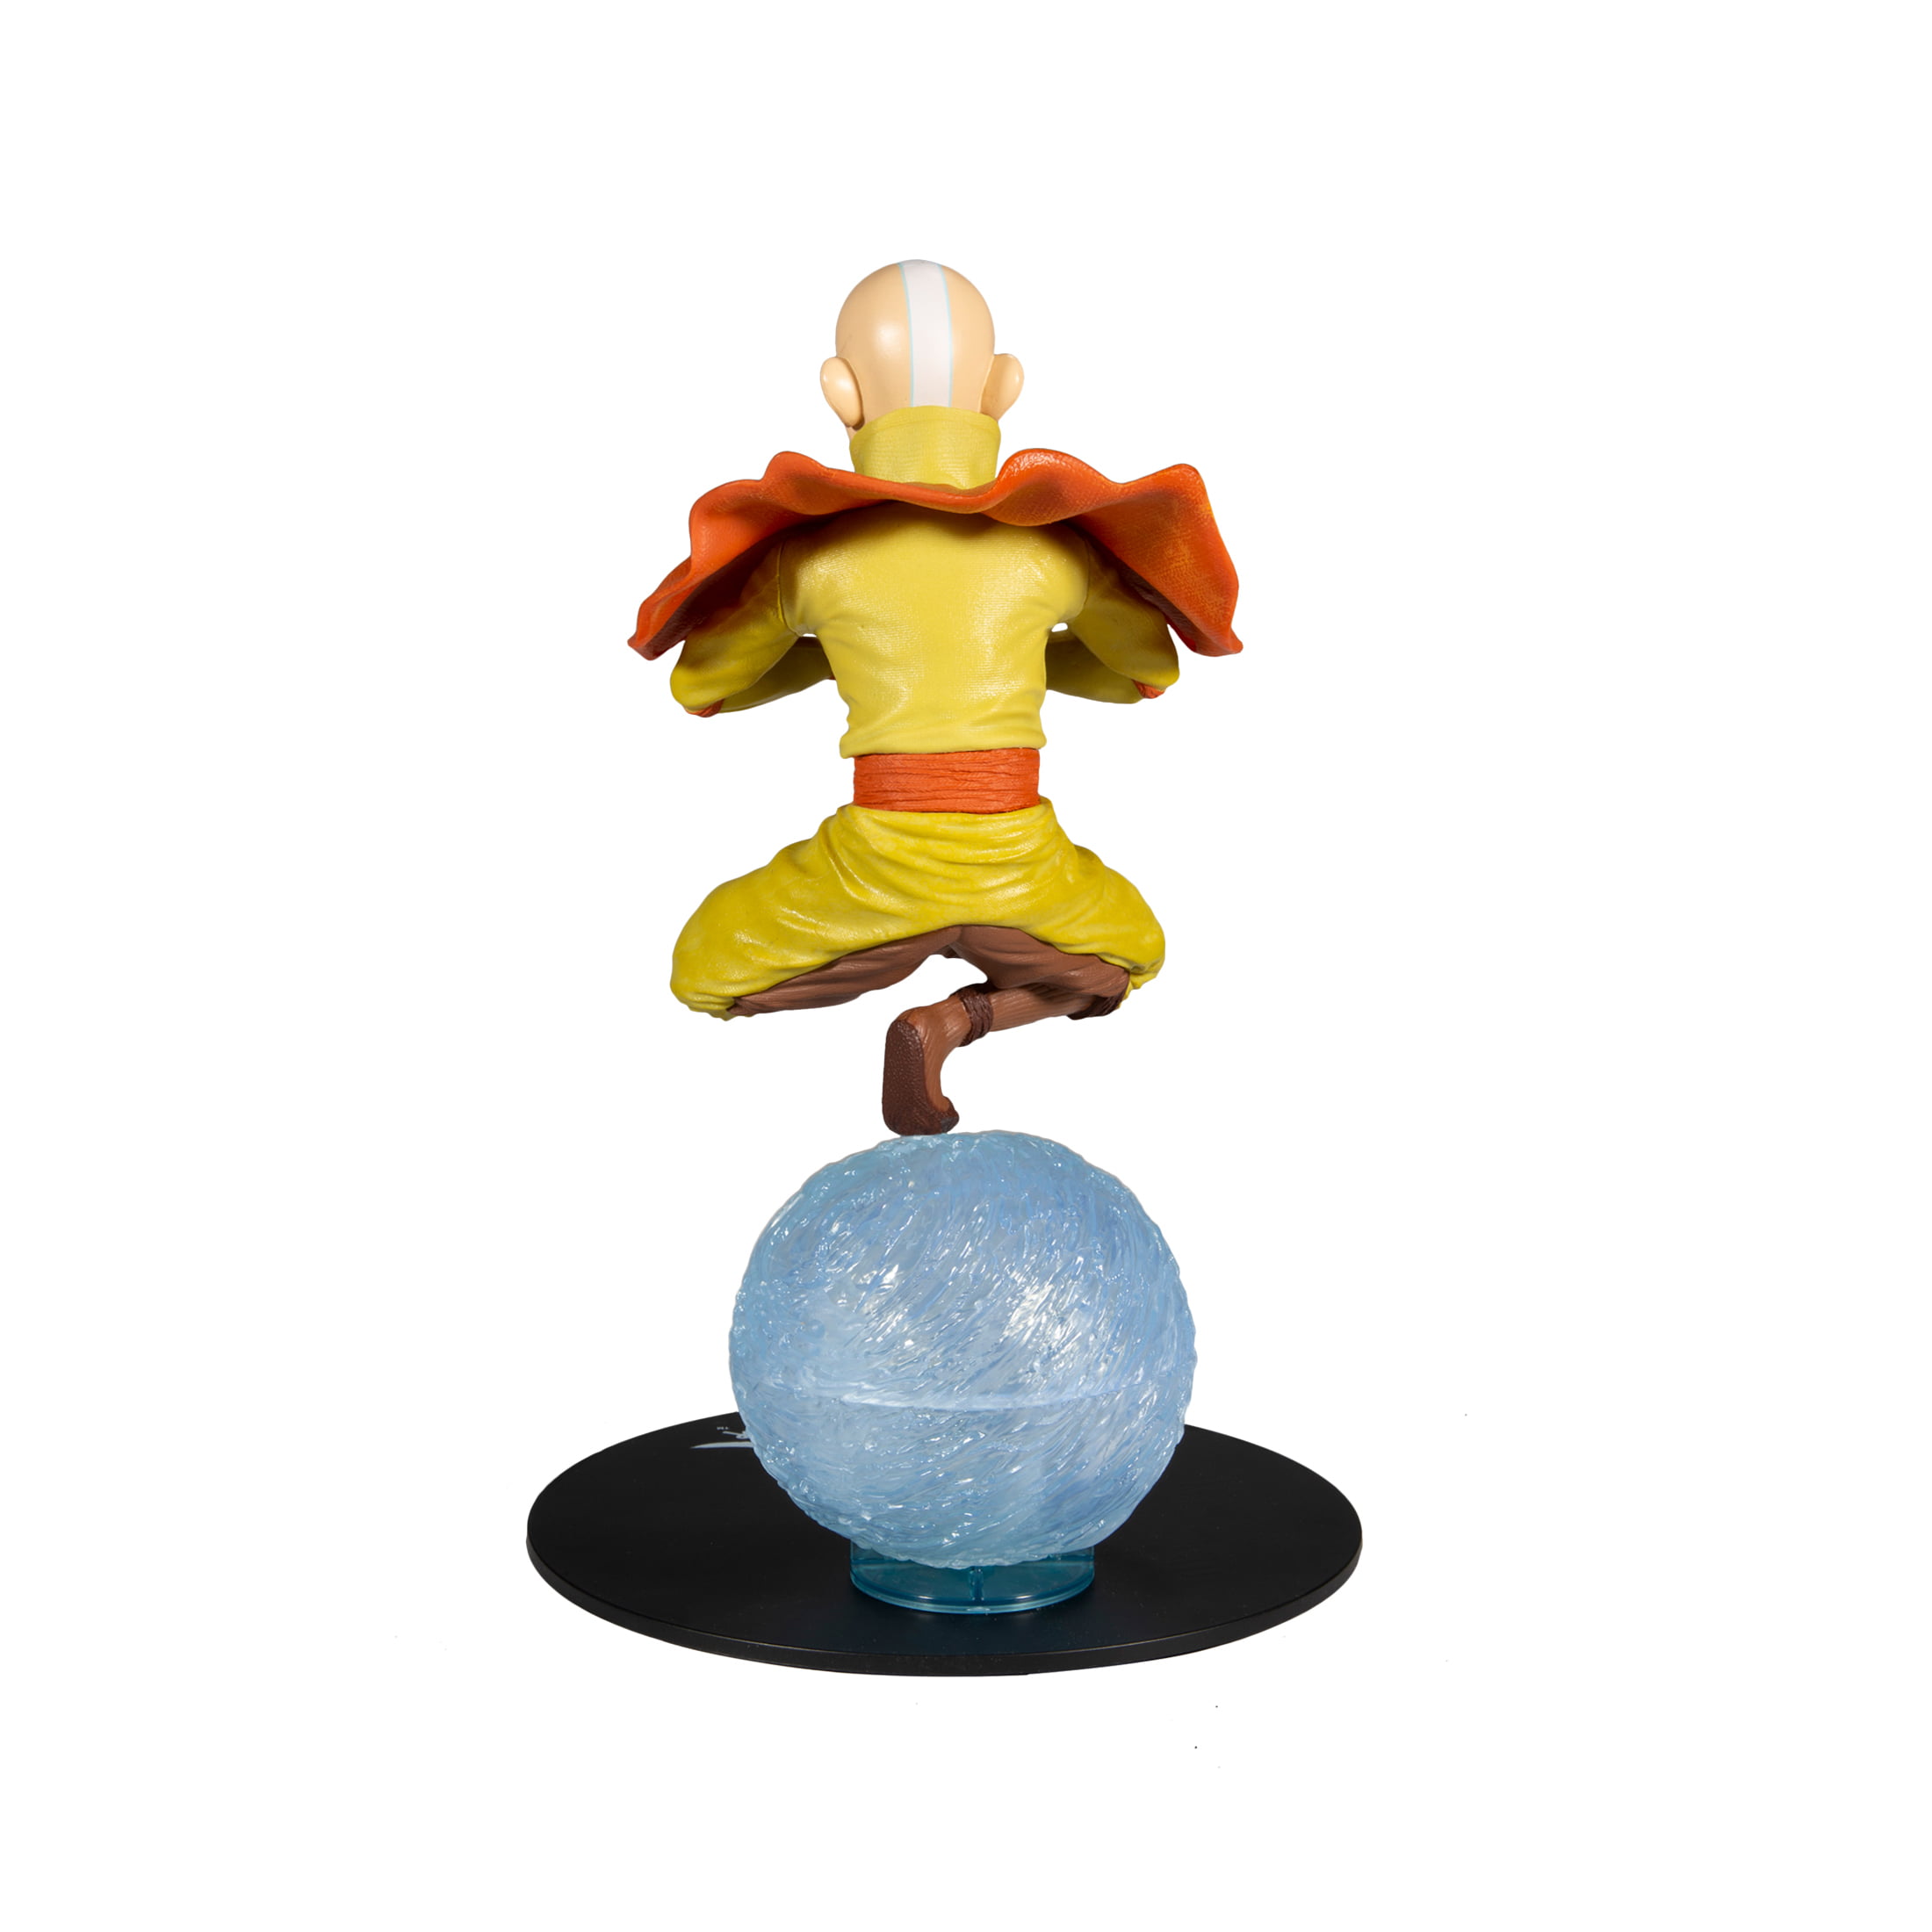 Avatar The Way of Water Collectibles Available for PreOrder NOW